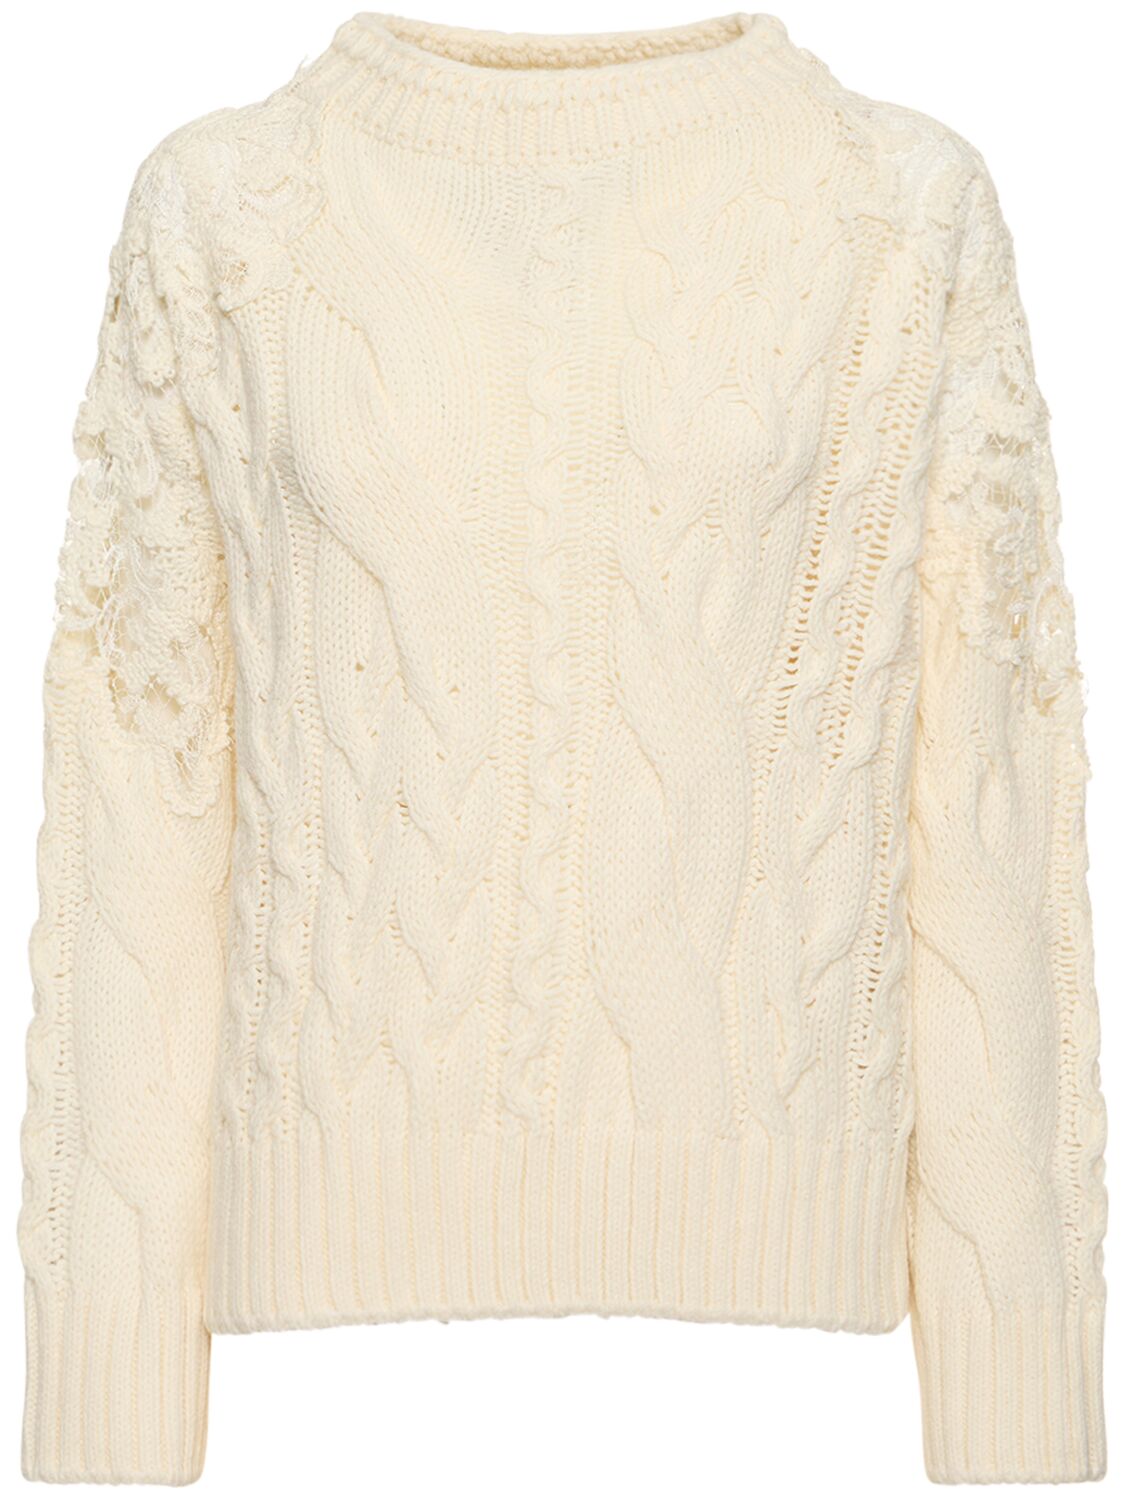 ERMANNO SCERVINO WOOL BLEND CABLE KNIT & LACE SWEATER